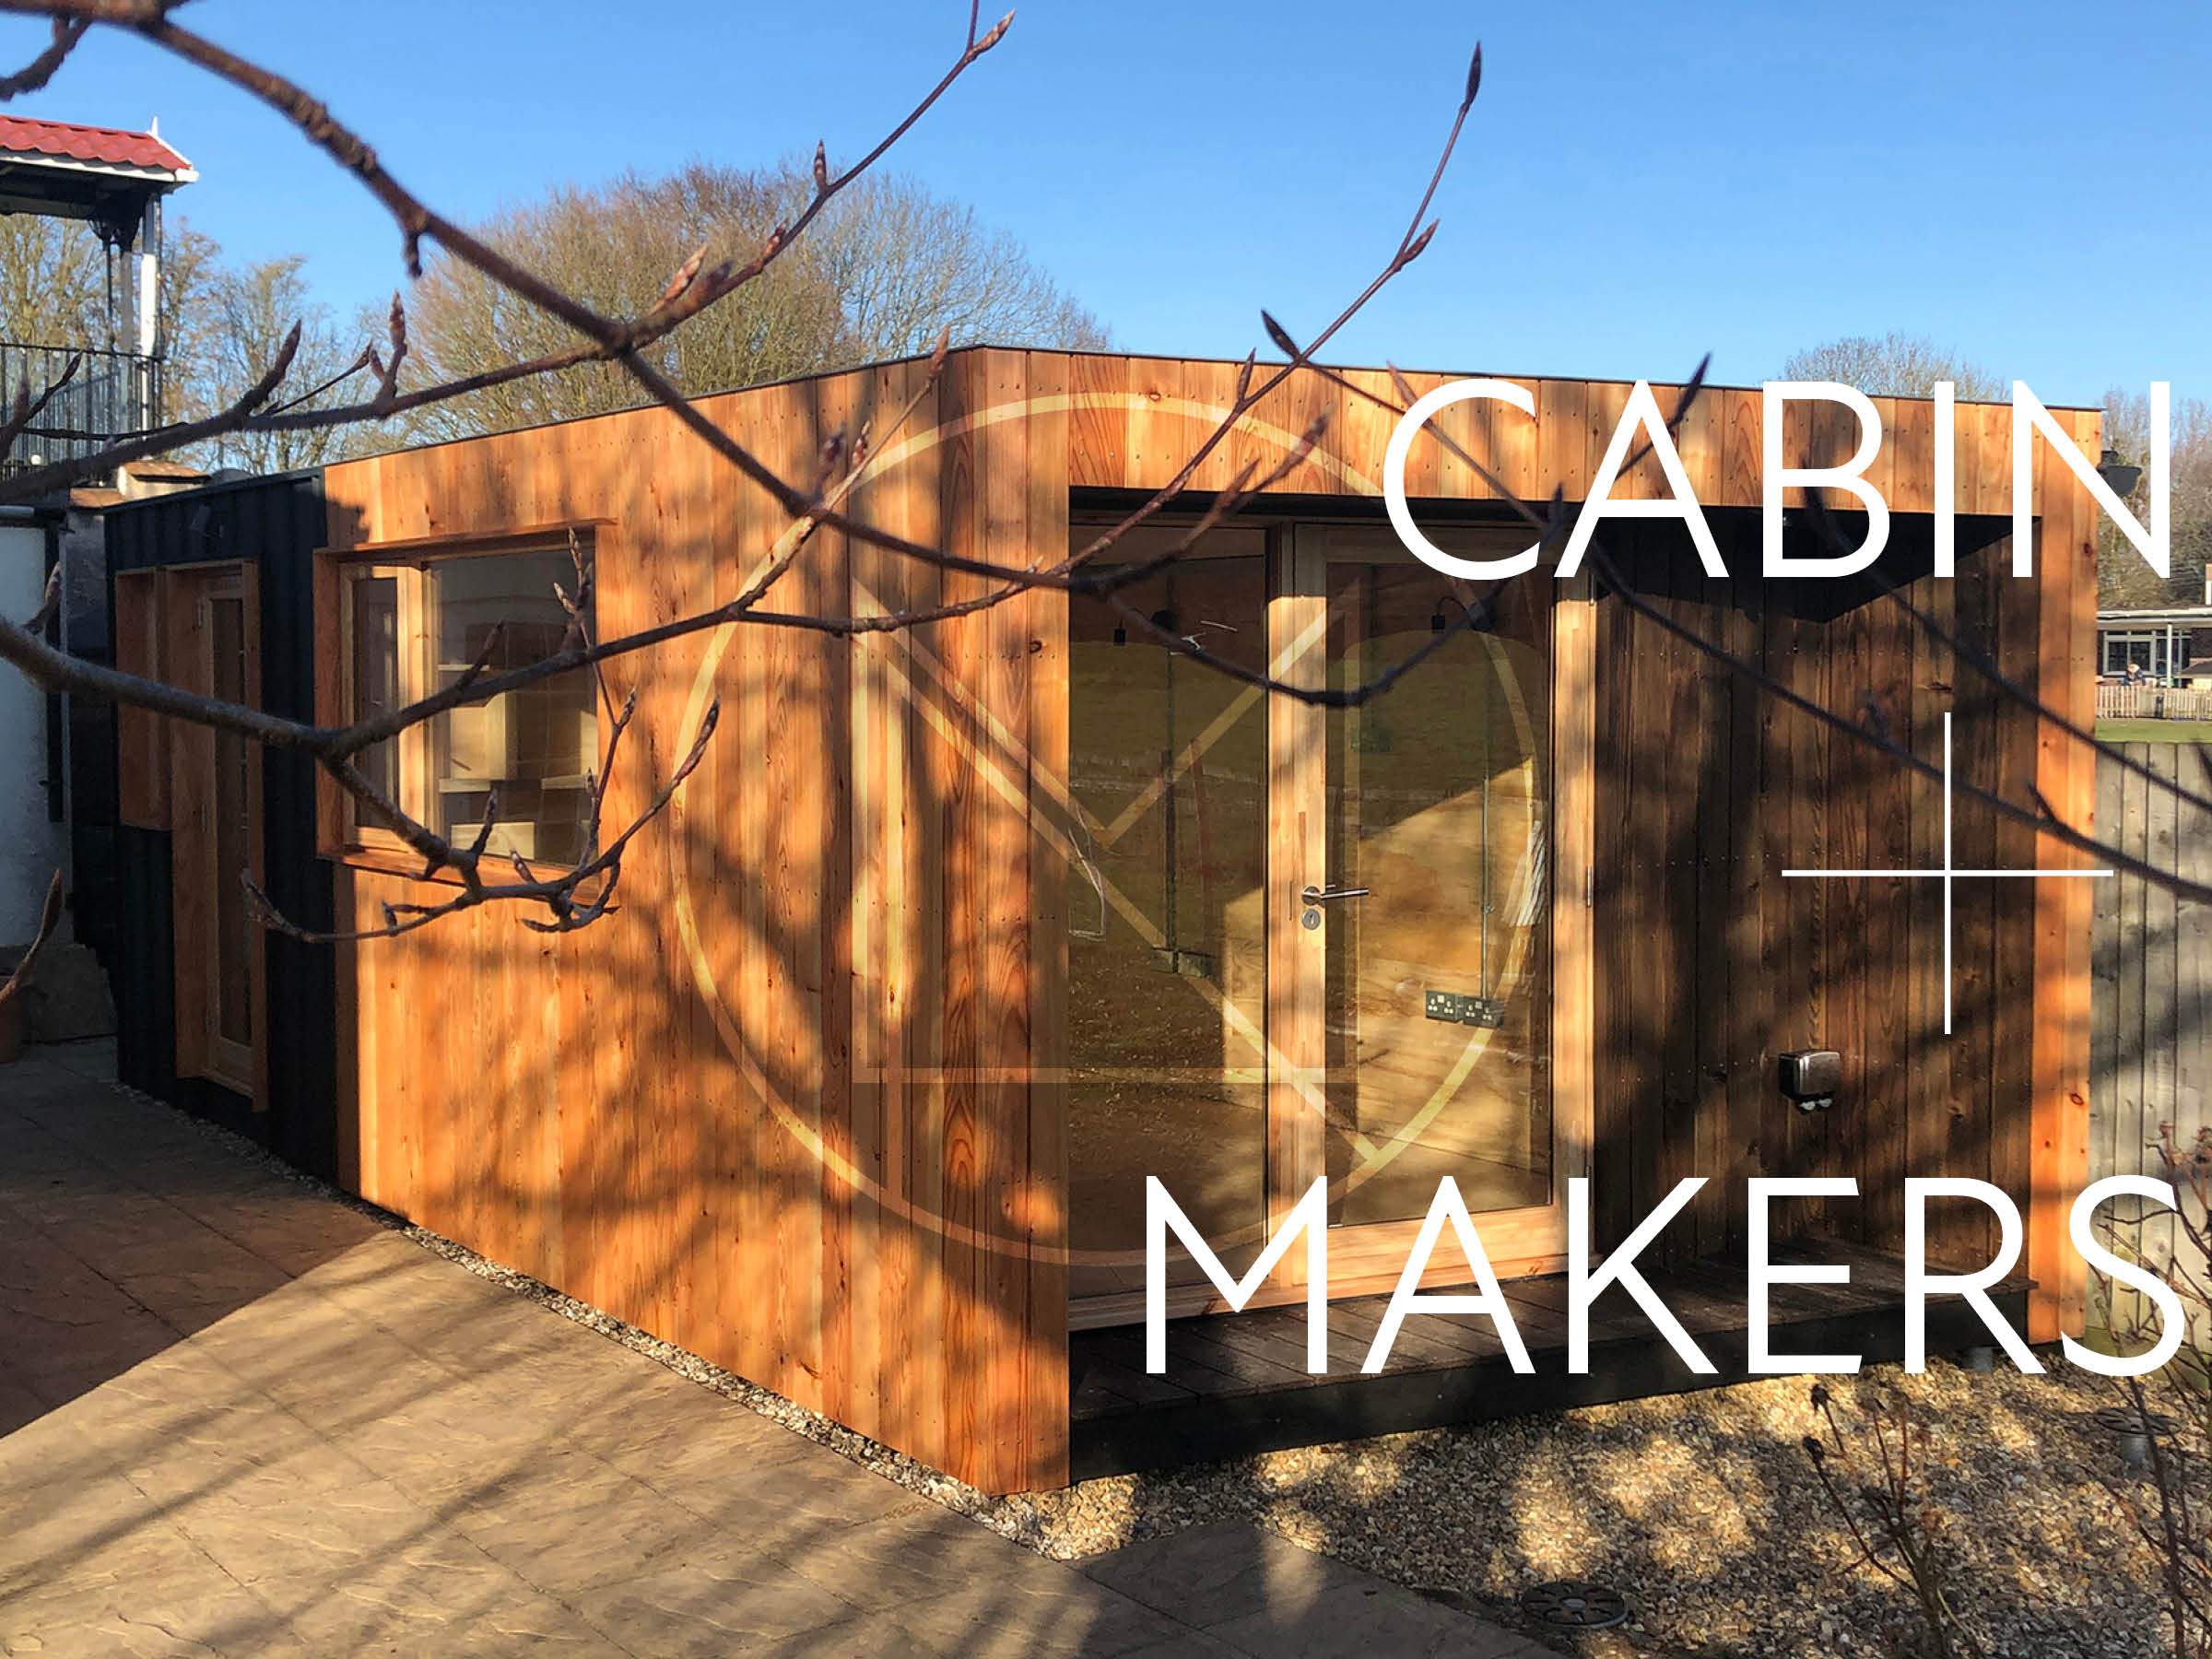 Cabinmakers cabins and makers featured image